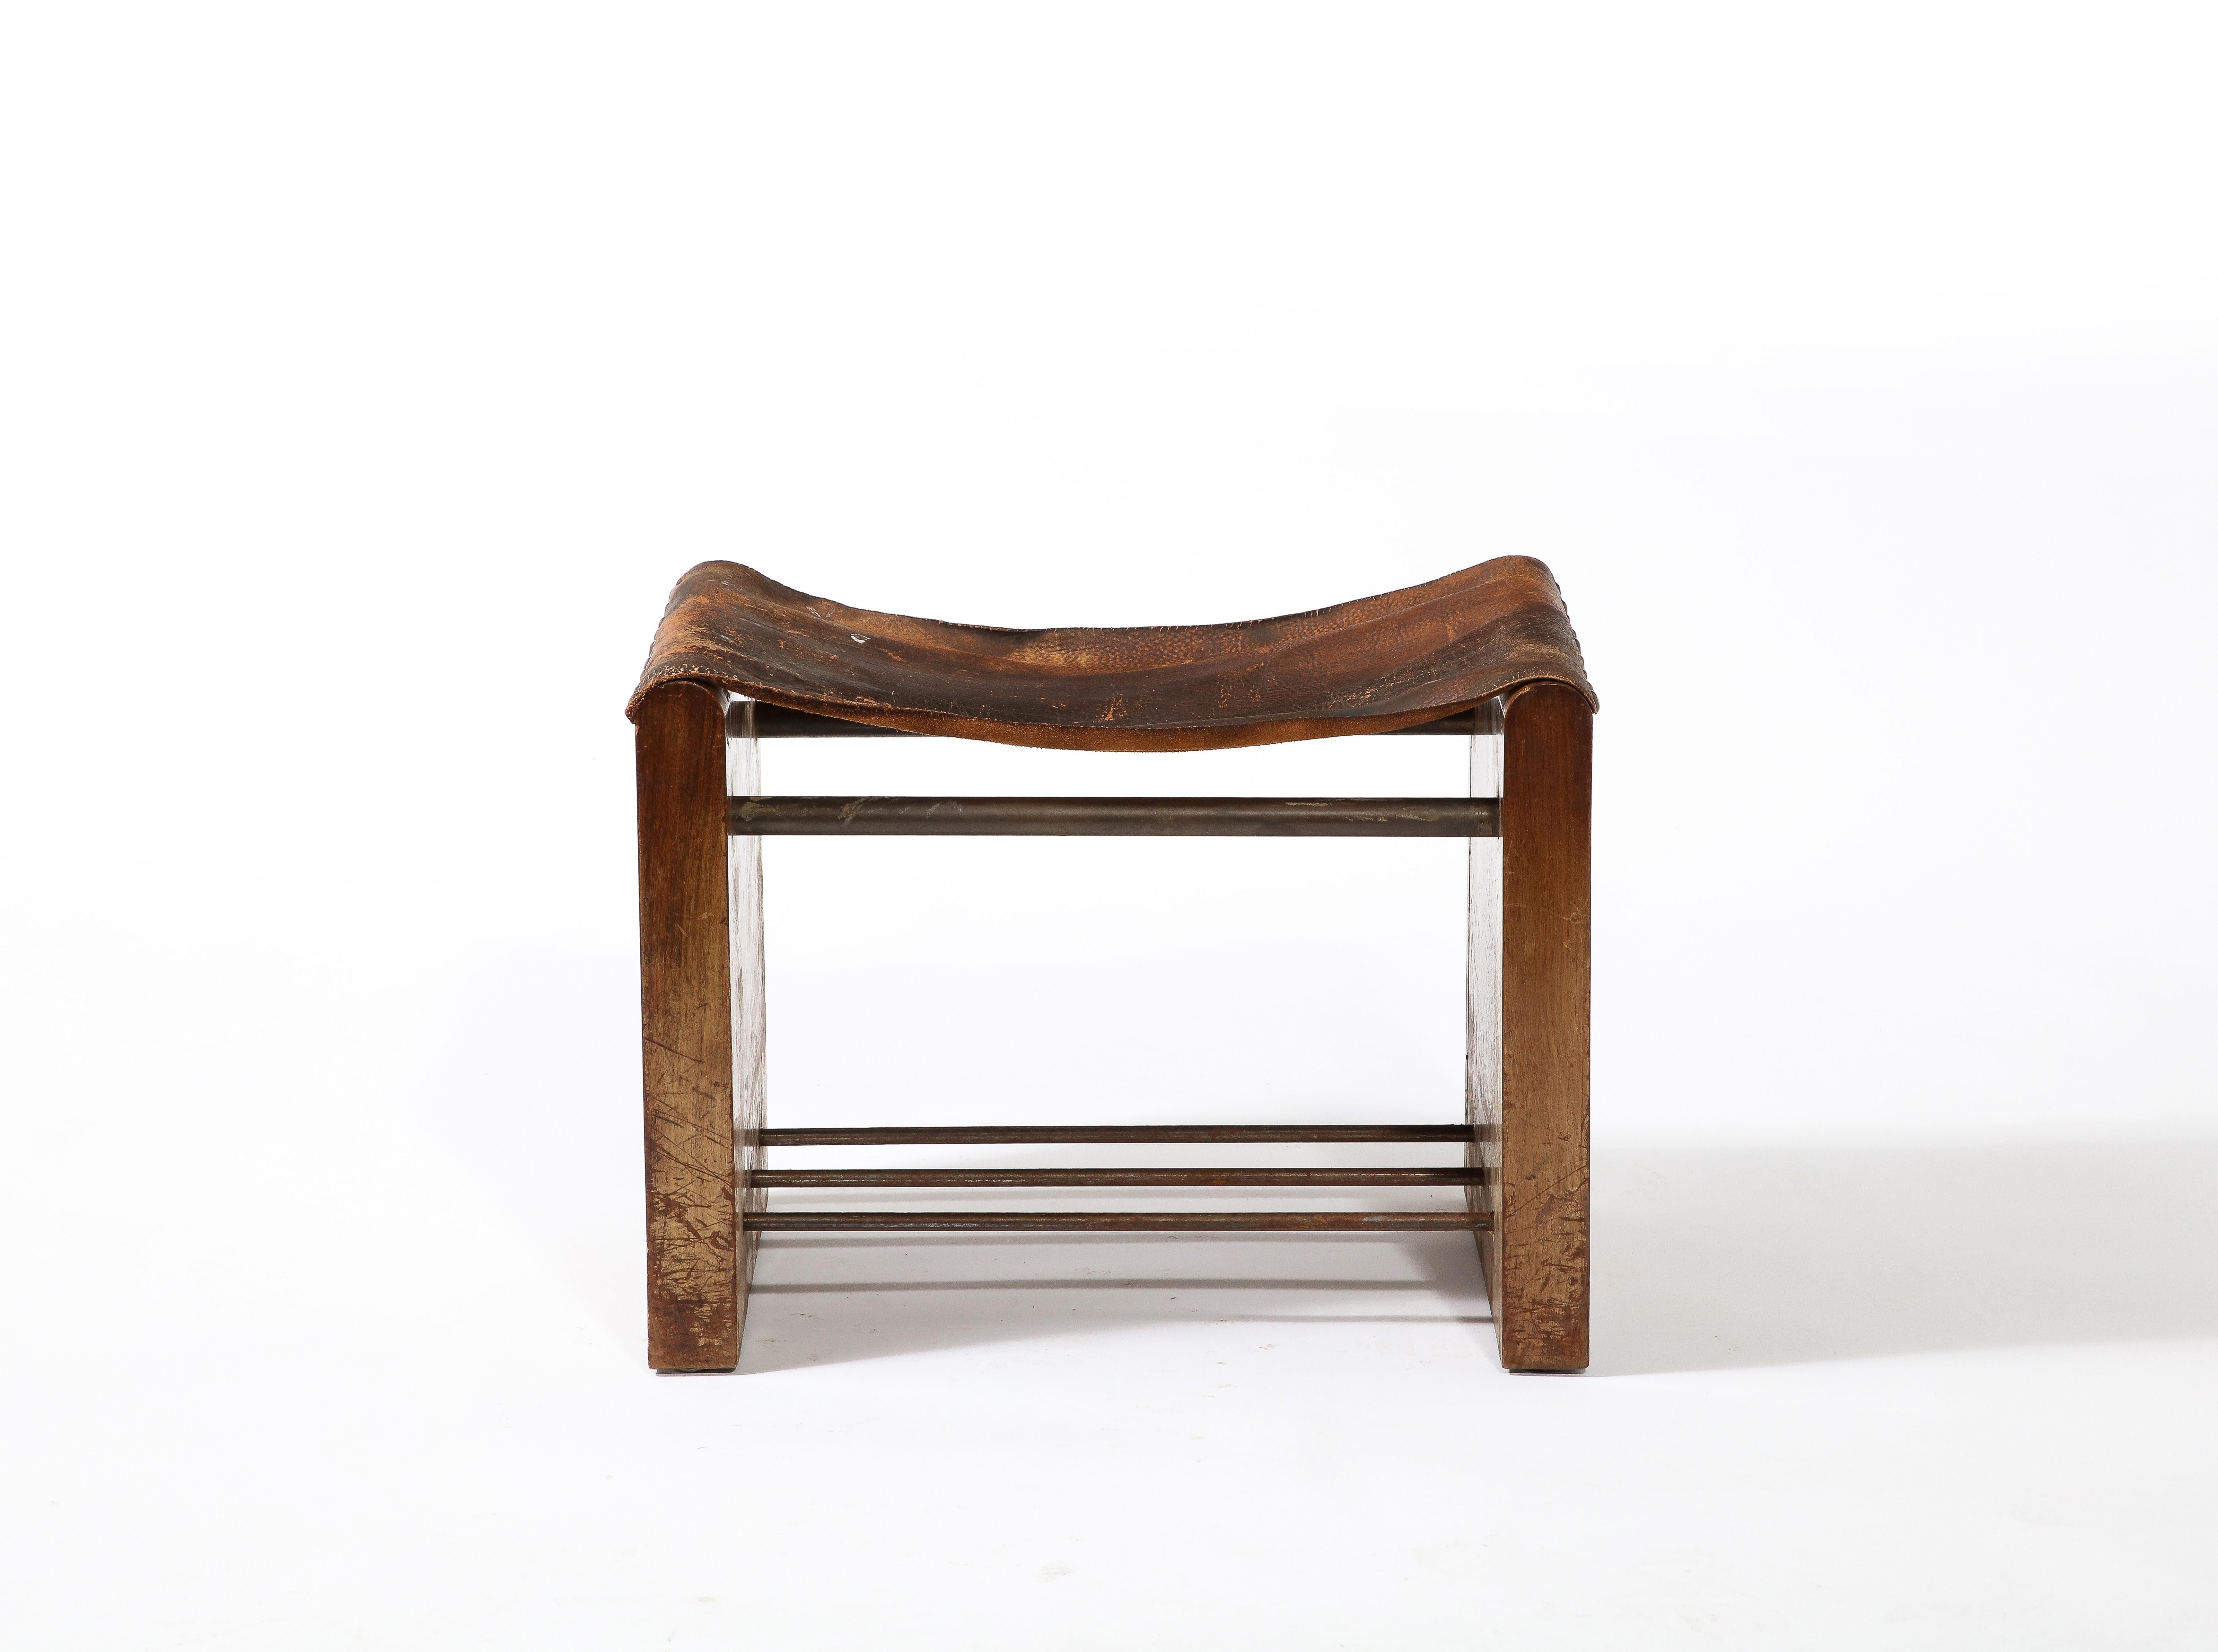 Handsome modernist stool or small bench form attributed to Adnet. Incredible patina. Restoration to leather is required. 